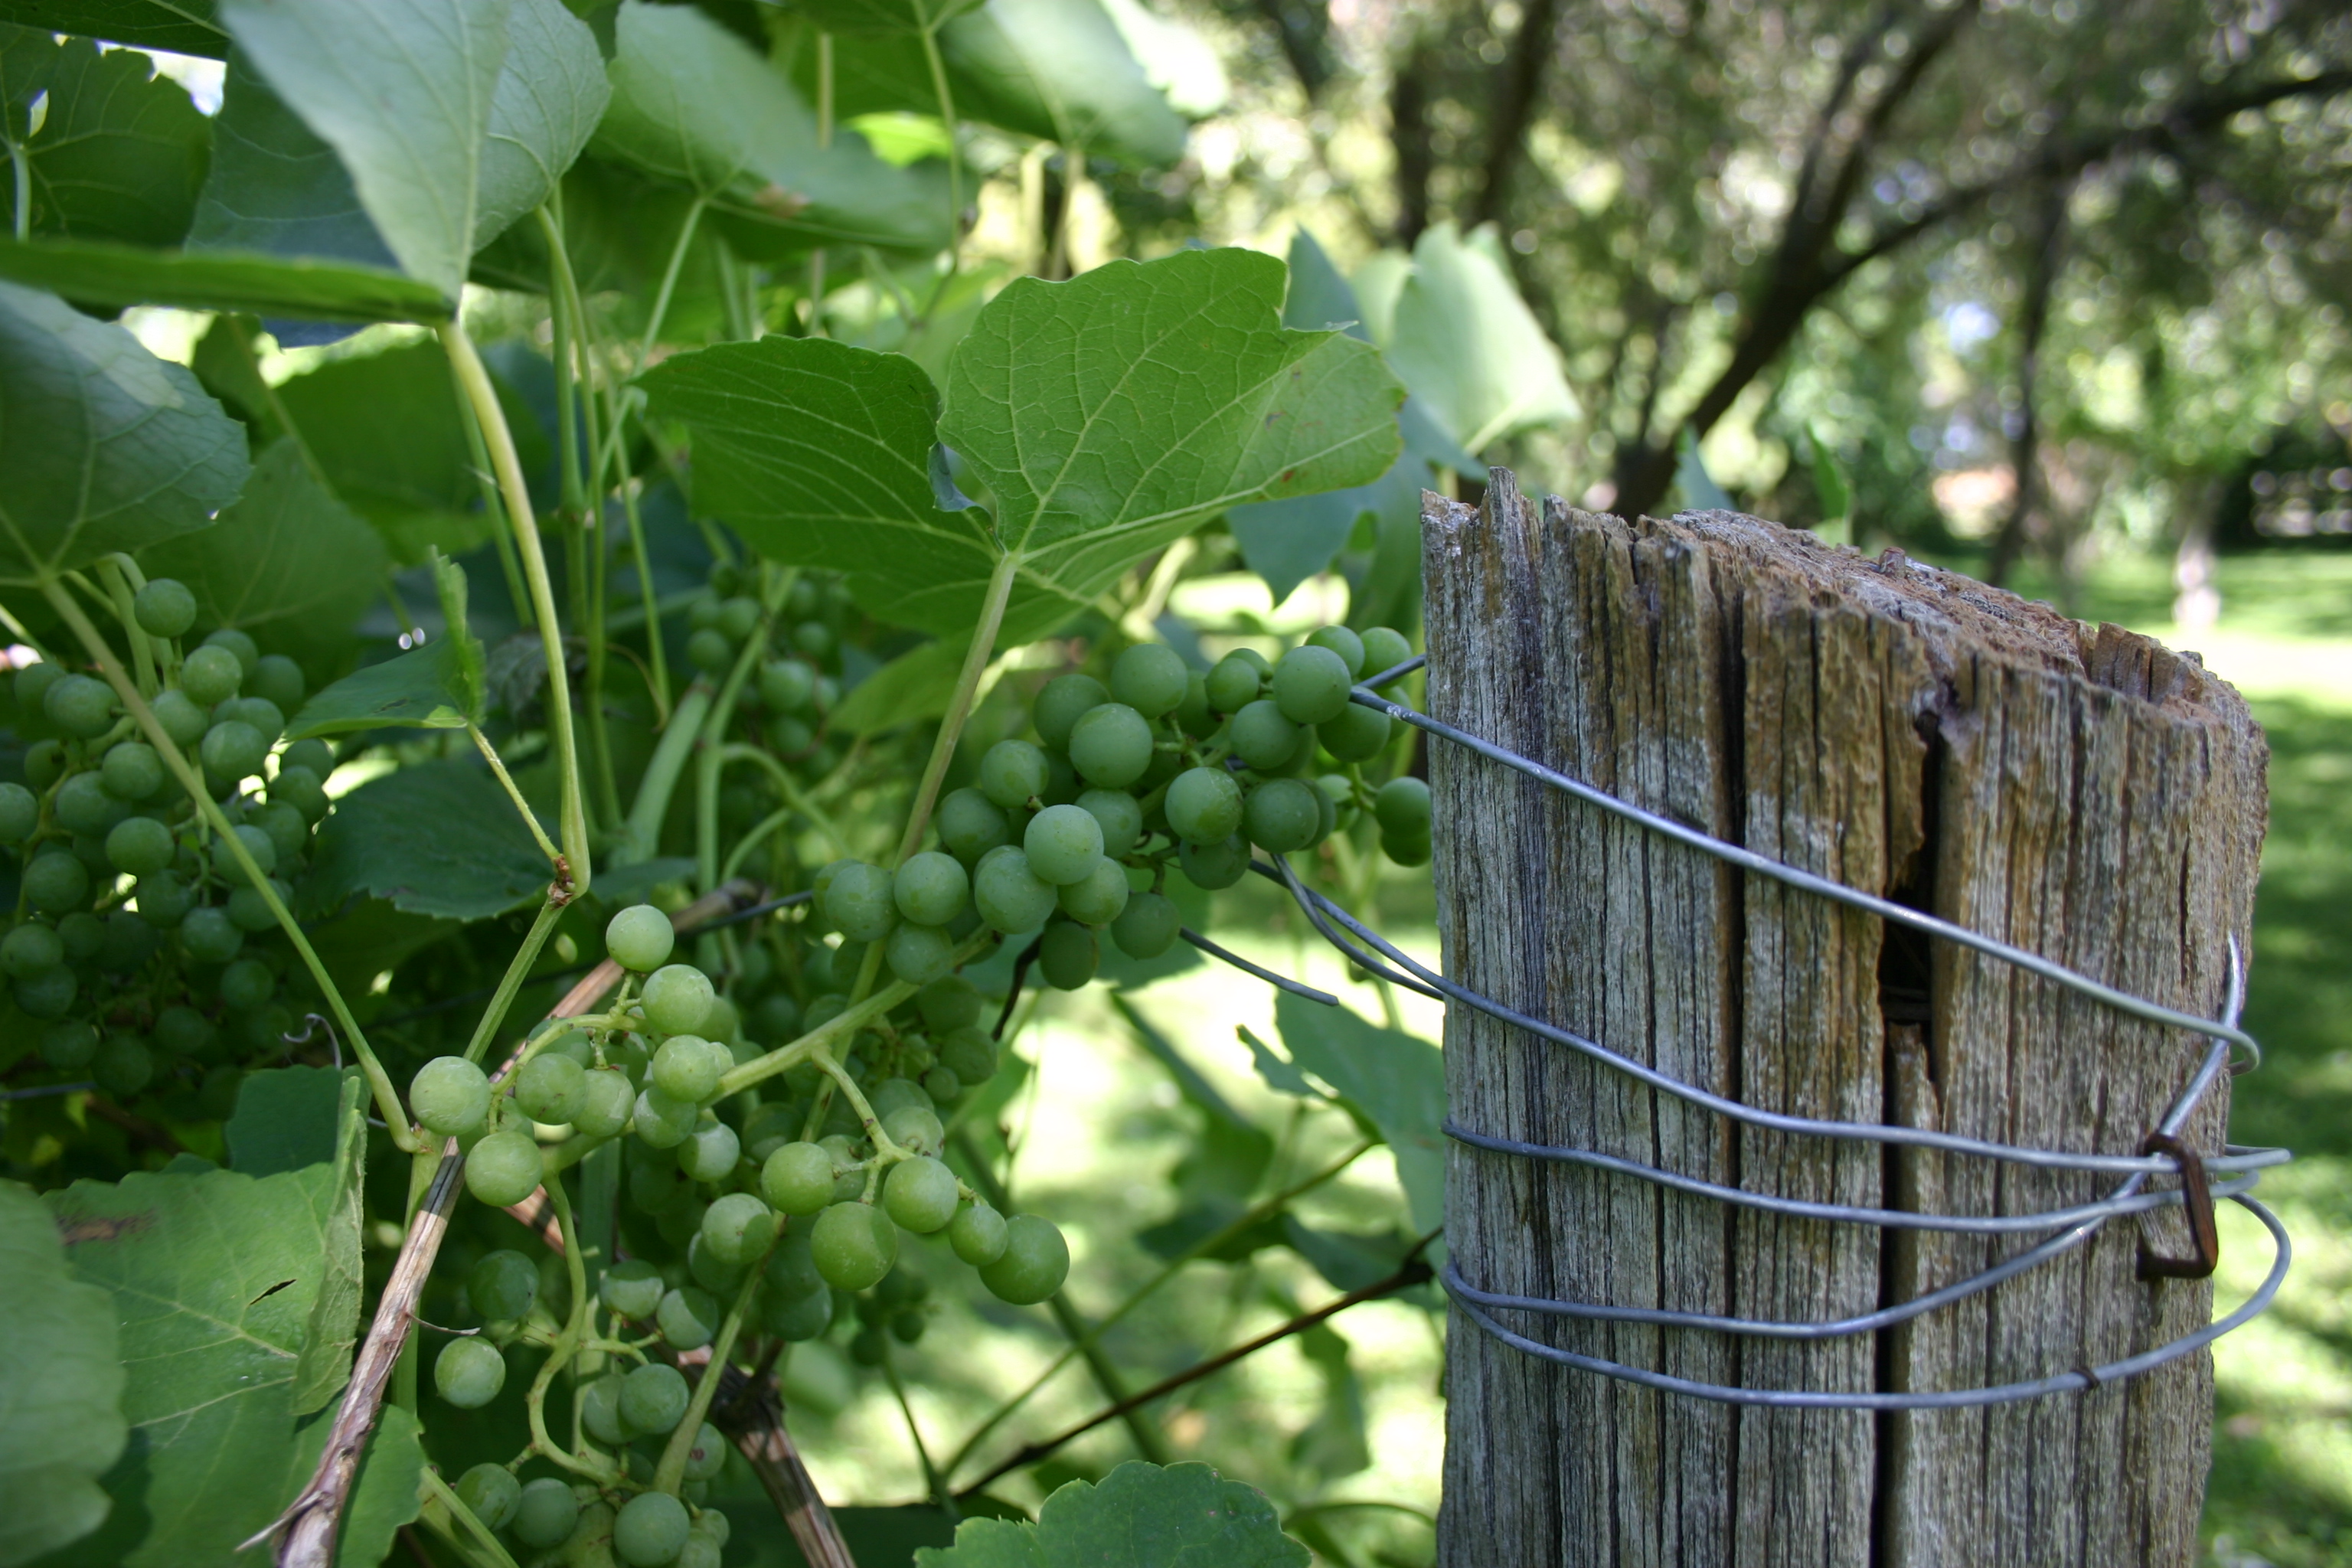 Green grapes and leaves near a wired wooden fence post.